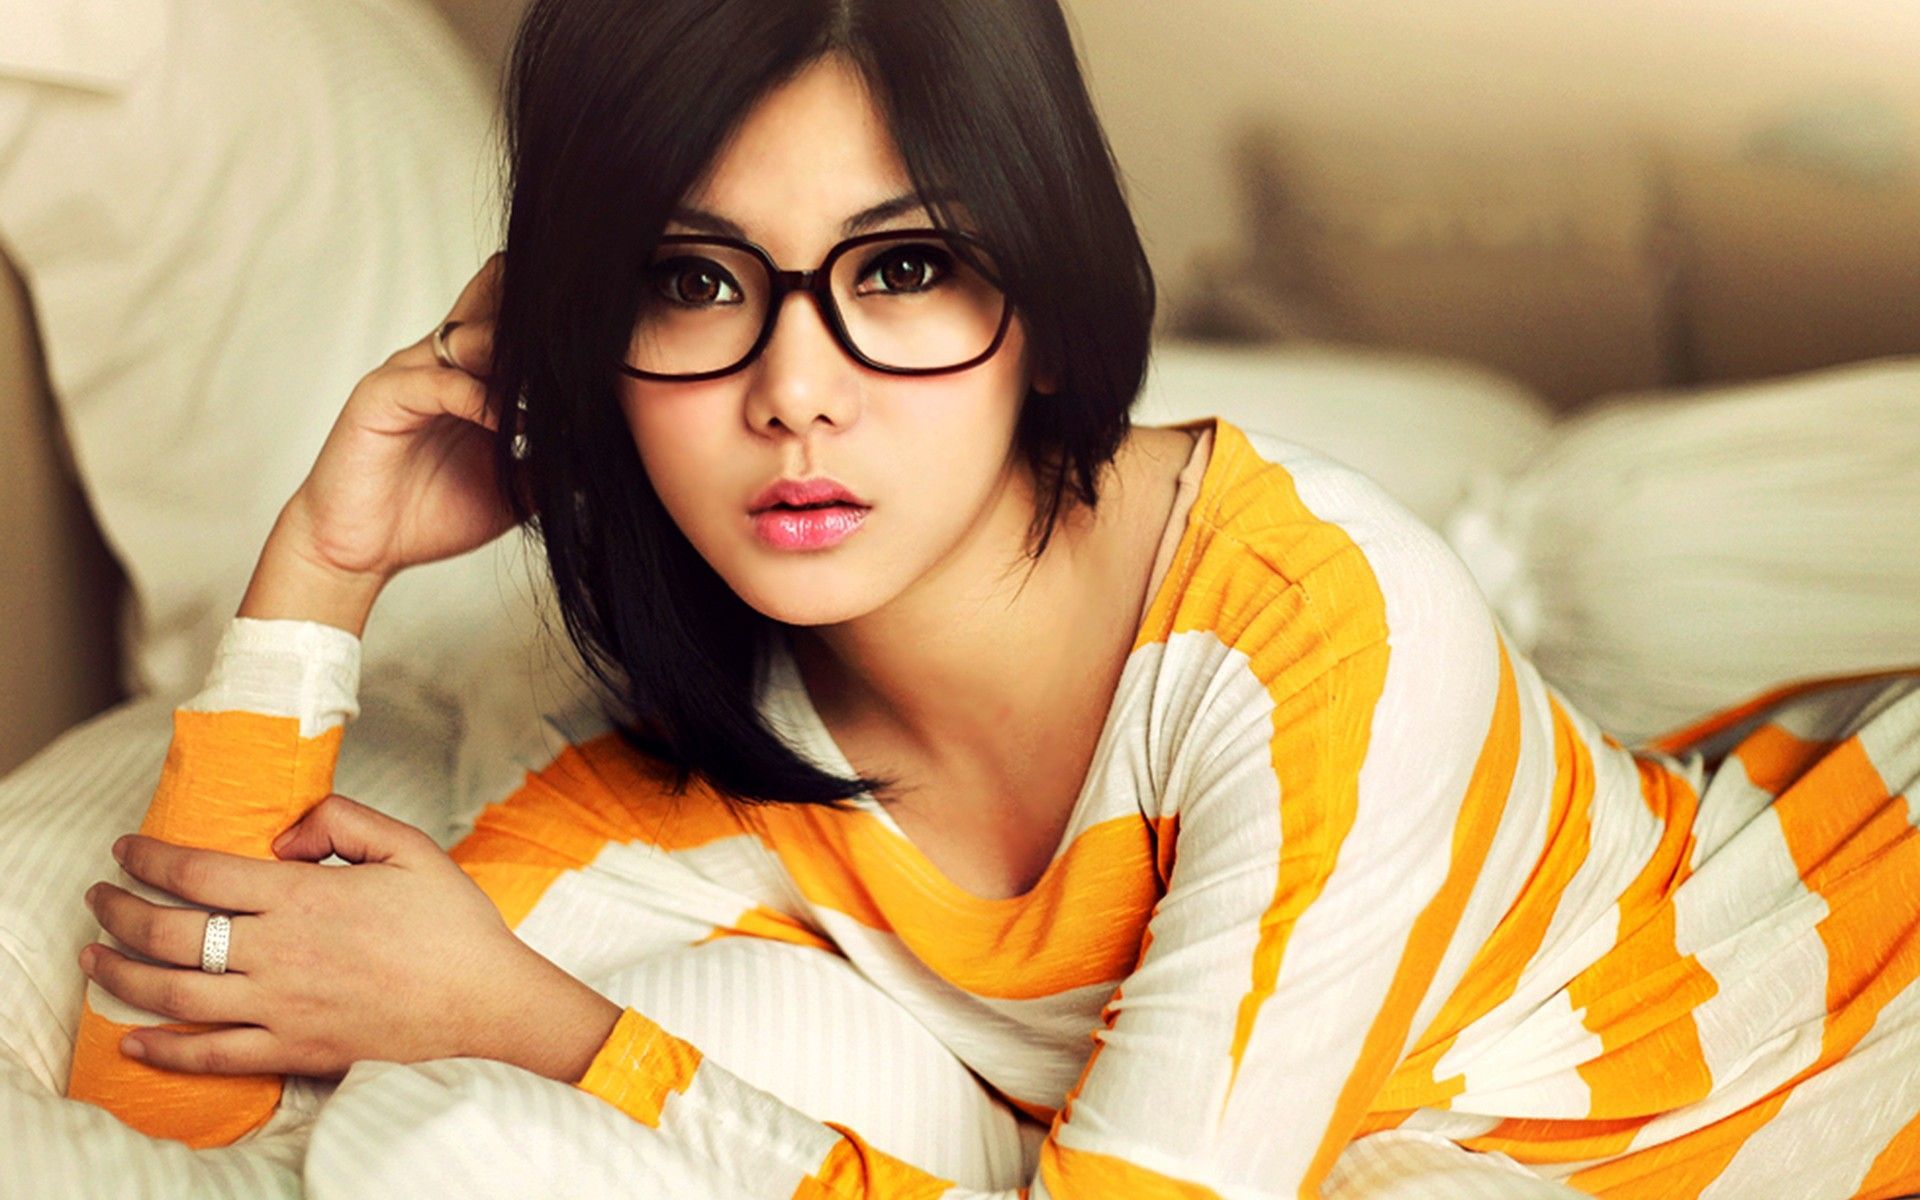 women models glasses Indonesia Asians girls with glasses upscaled badquality Valentine Fannie bre. Brunette glasses, Profile picture for girls, Girls with glasses